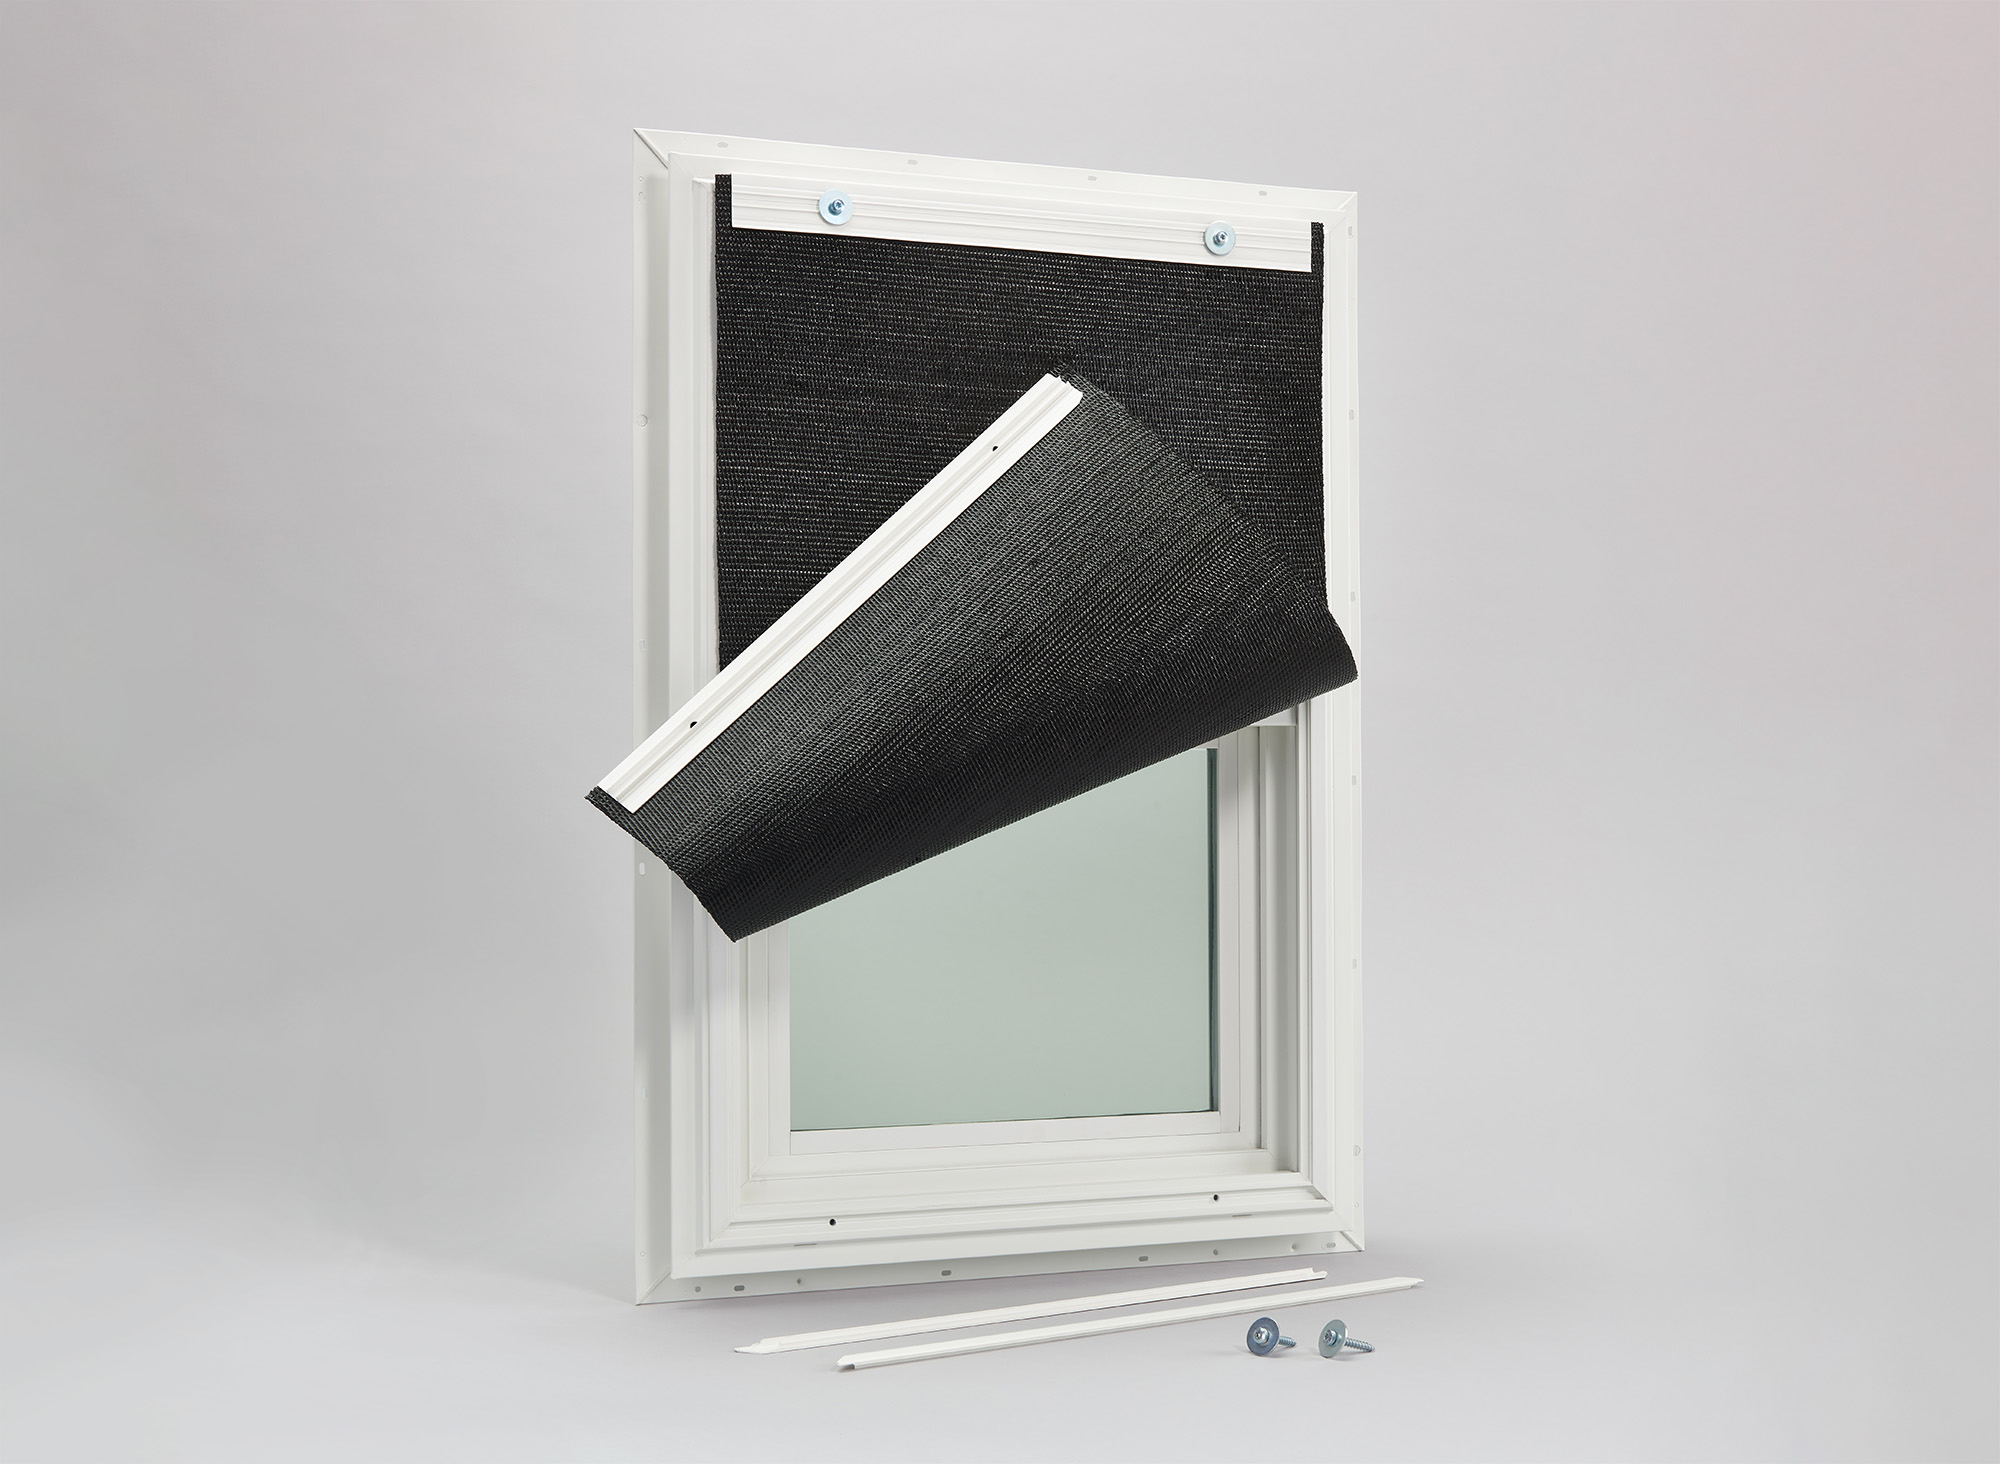 RAUSHIELD window storm protection system building product